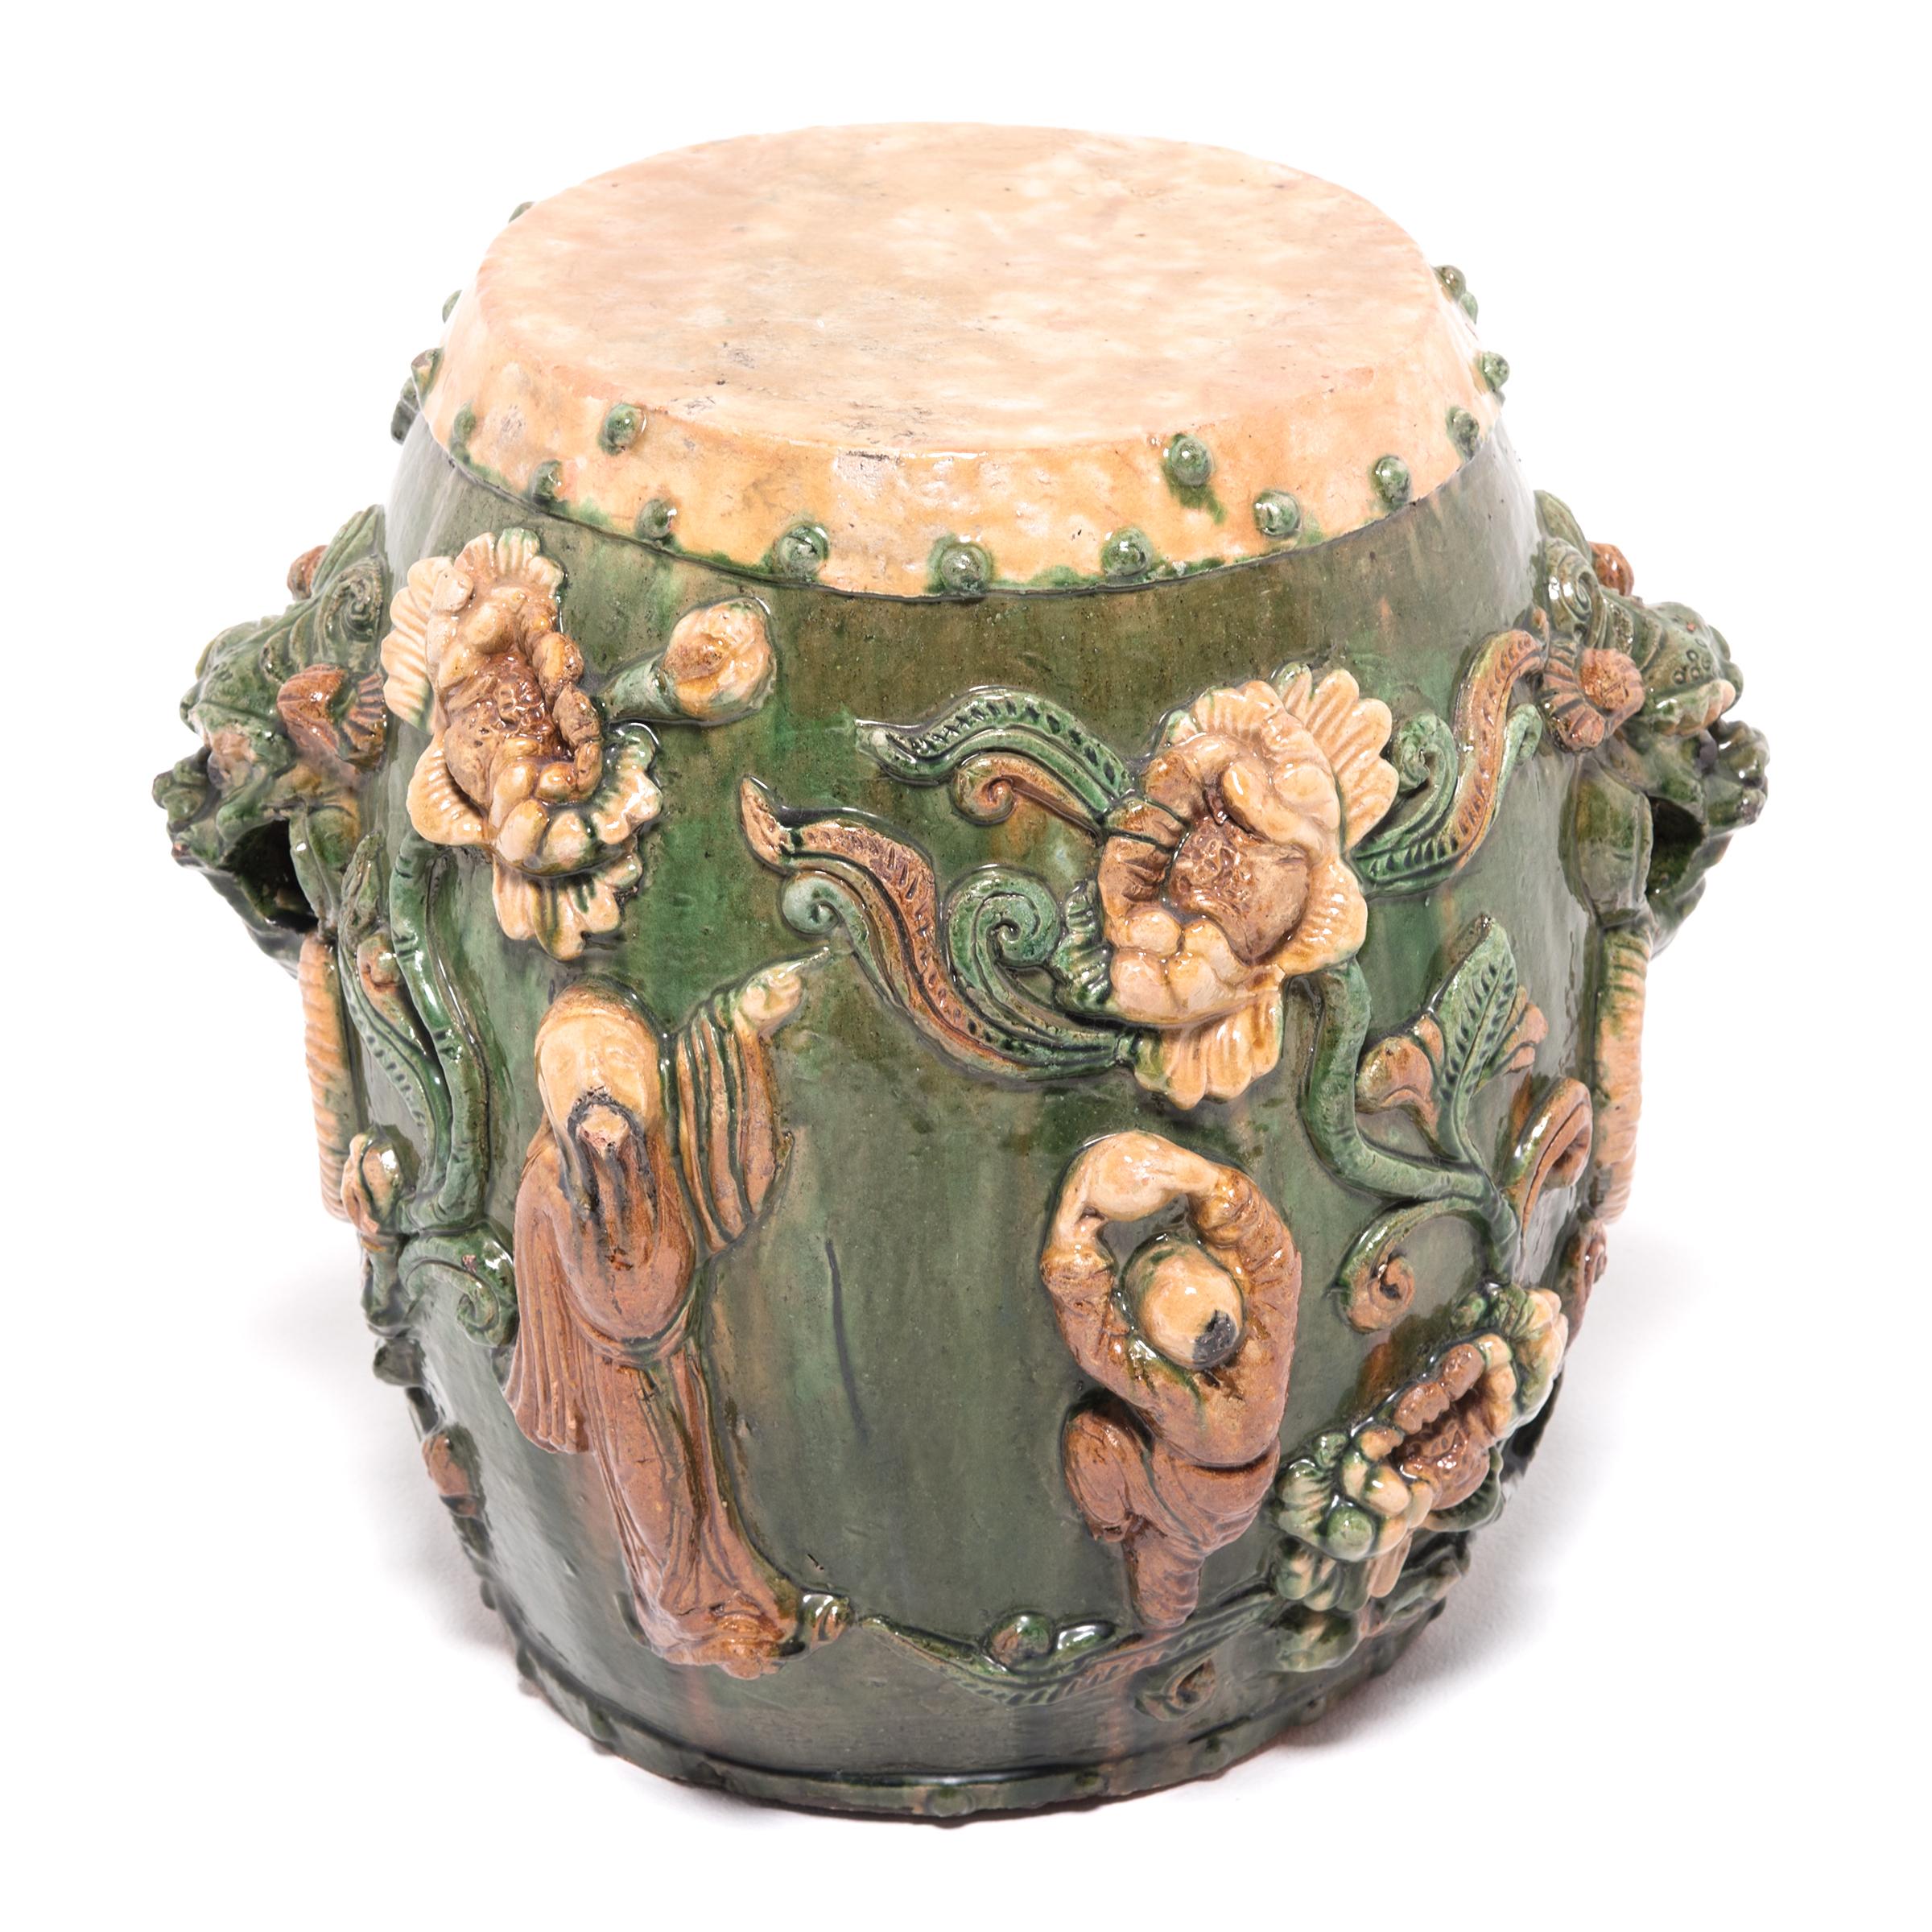 Qing Early 20th Century Chinese Peony Garden Stool